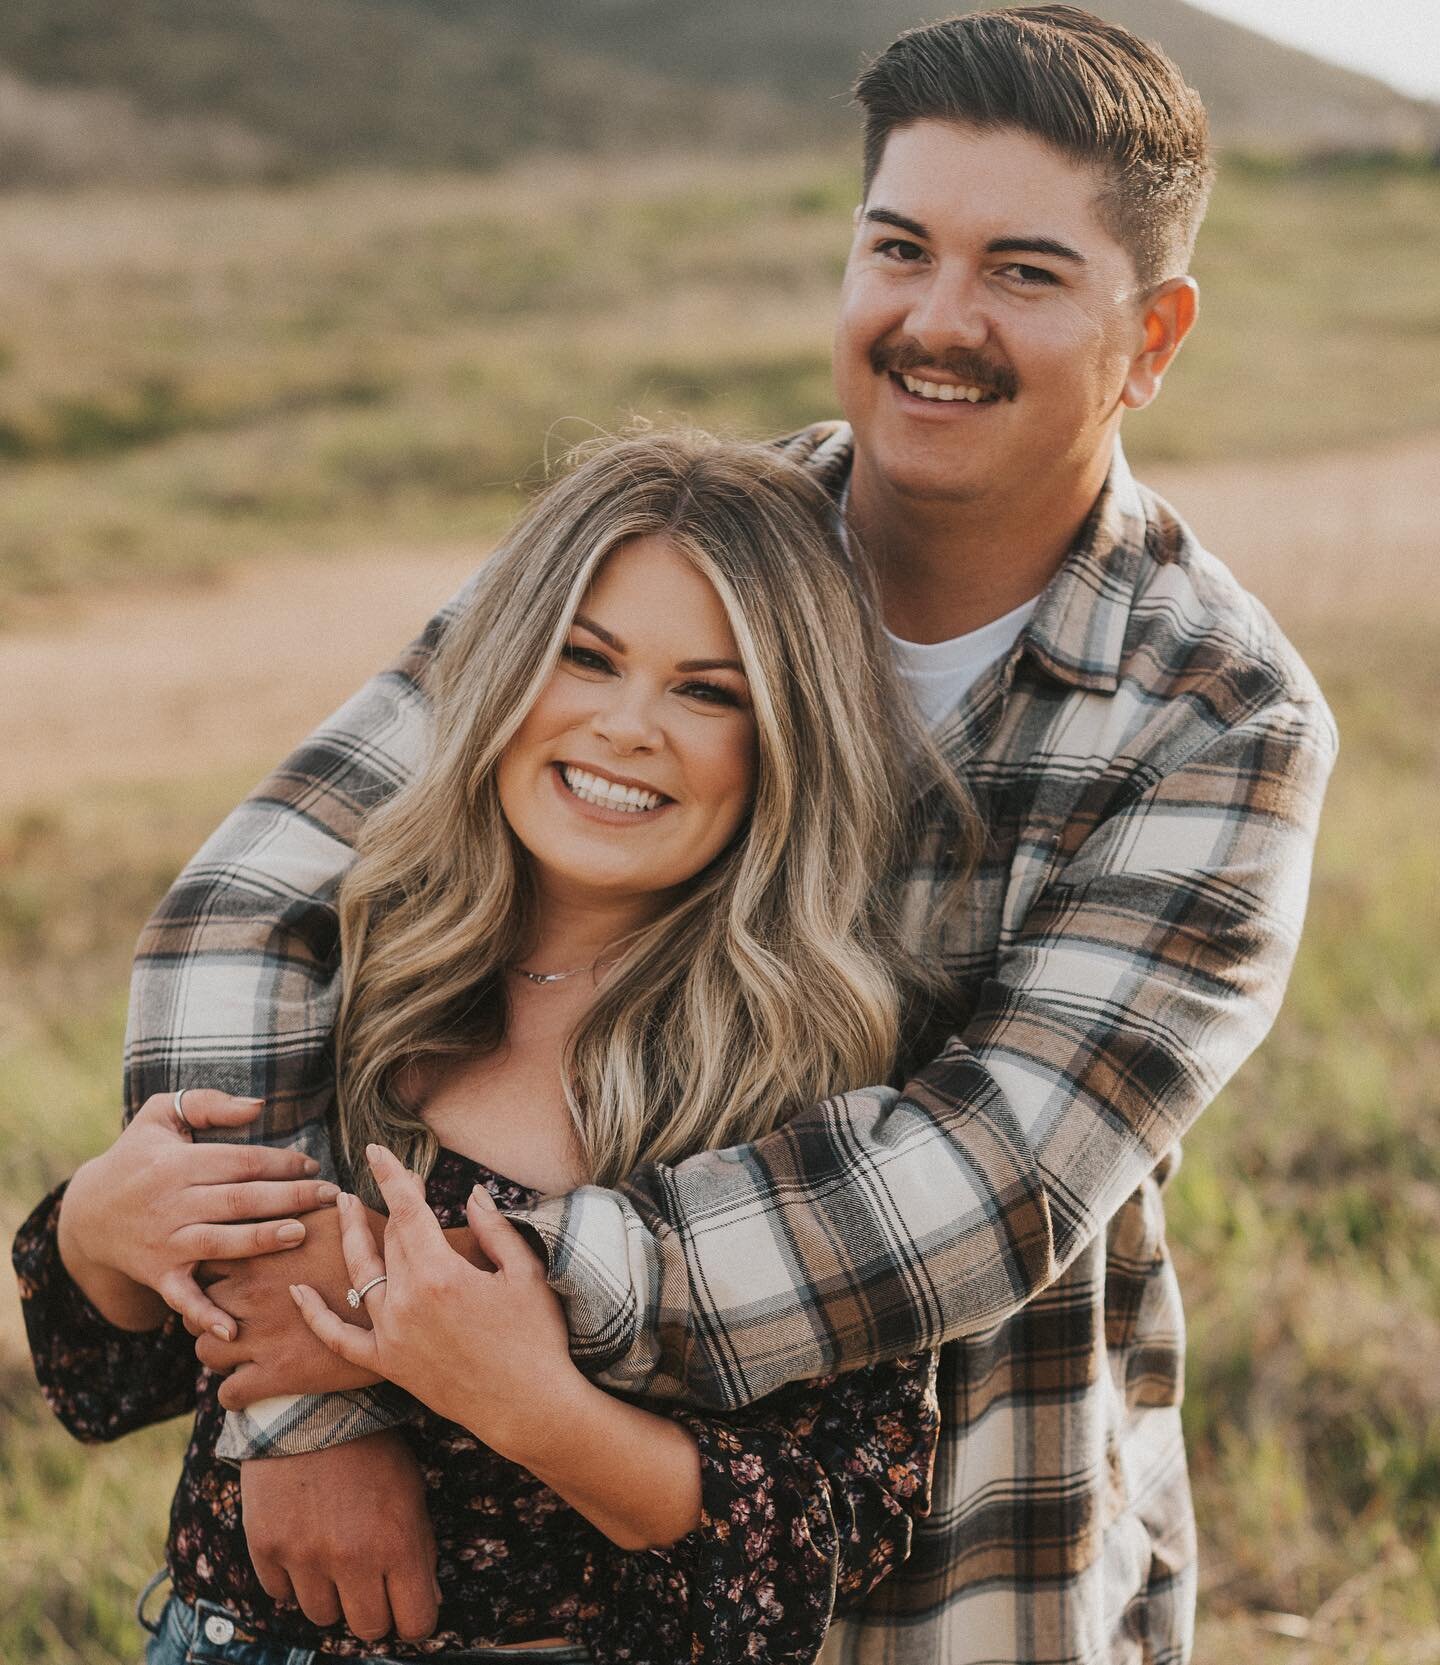 Leave it to @allgoodthingsphotography to capture the most amazing engagement photos ✨ 
Makeup by me on the adorable bride to be @tay_bee 🤍💍
.
.
.
.
.
.
#sandiegomakeupartist #sdmakeupartist #makeupartistsandiego #engaged #engagementphotos #bridalma